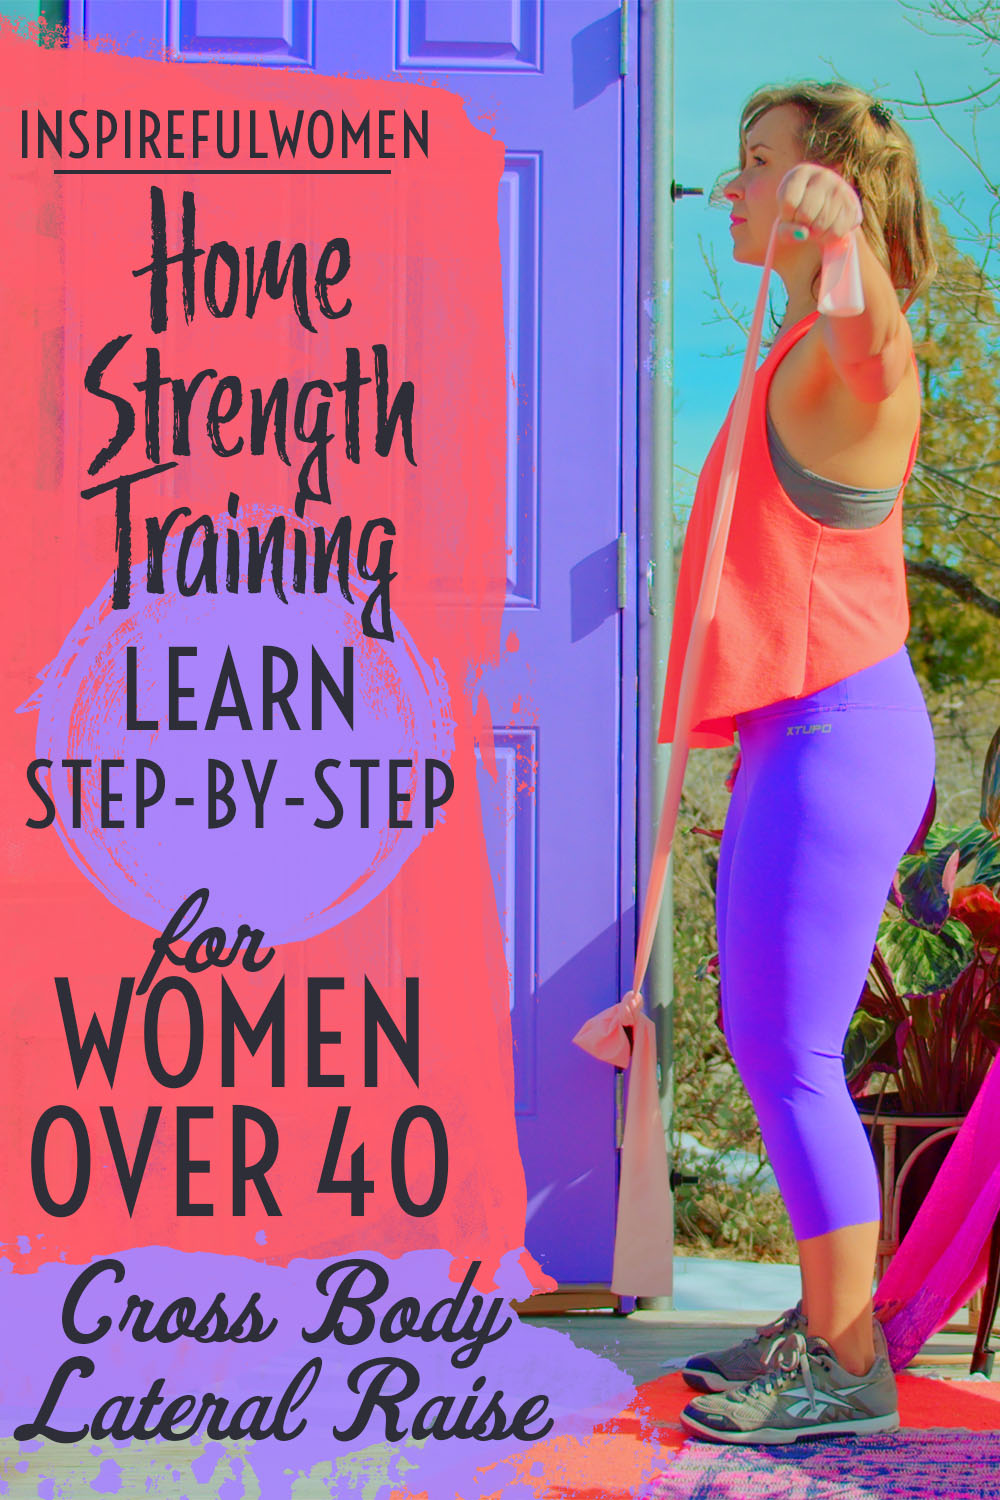 band-cross-body-side-lateral-raise-home-resistance-training-shoulder-exercise-women-40+